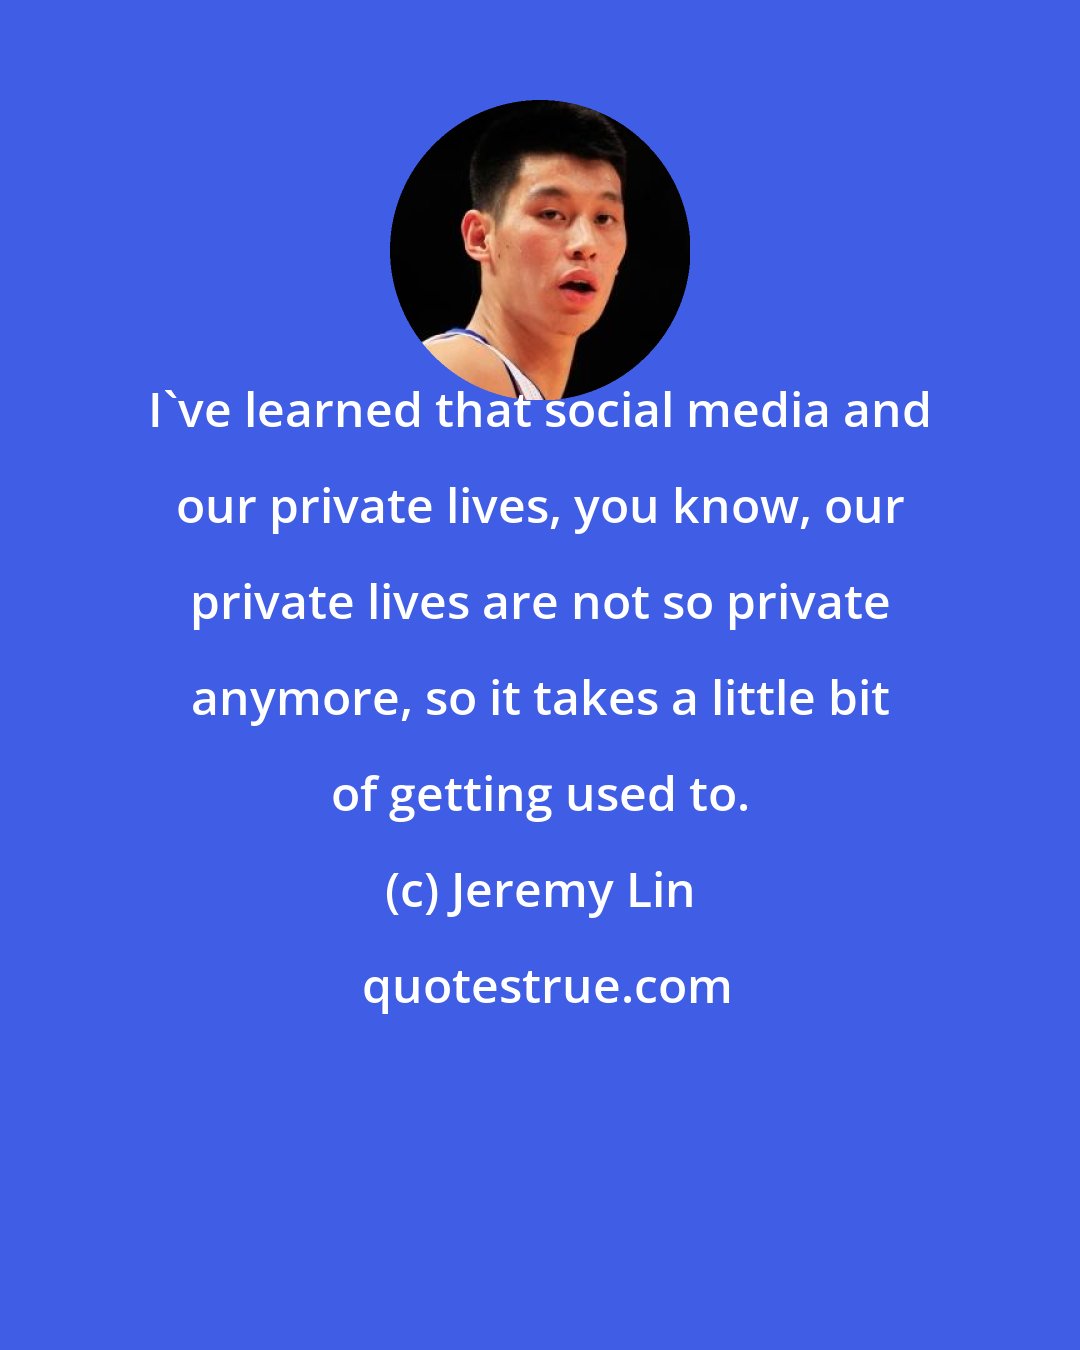 Jeremy Lin: I've learned that social media and our private lives, you know, our private lives are not so private anymore, so it takes a little bit of getting used to.